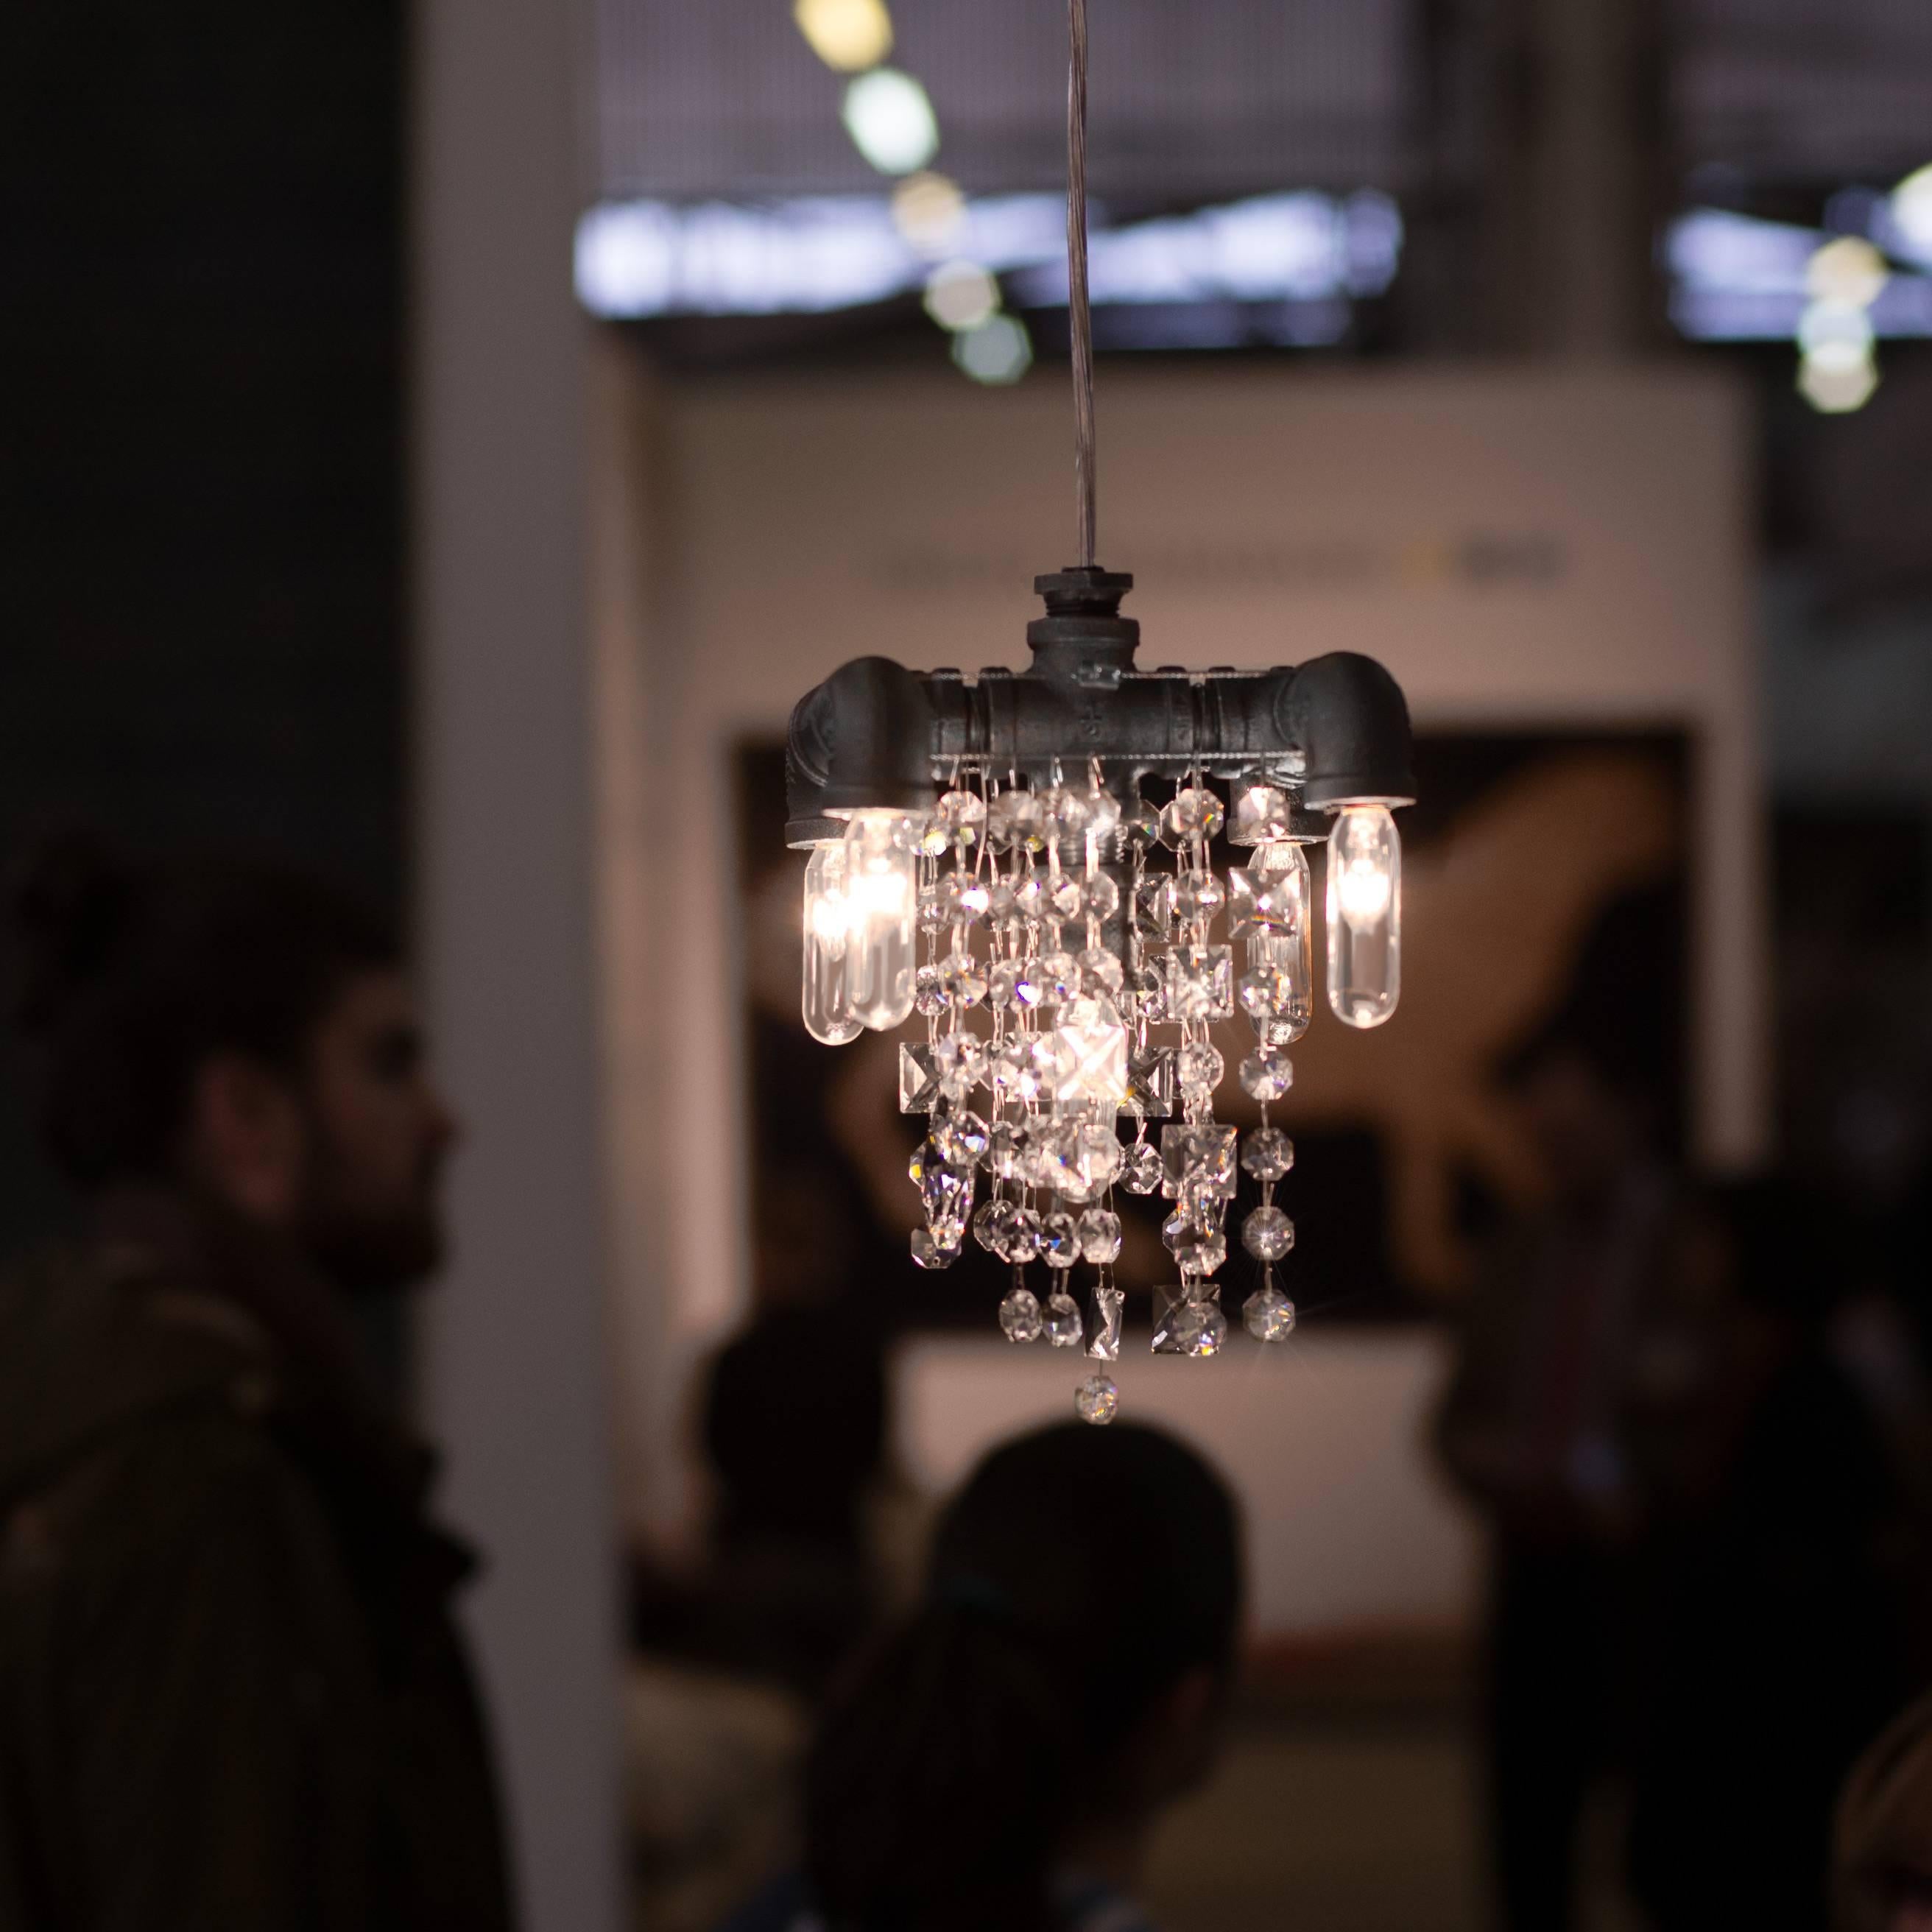 A modern pendant chandelier features a compact Industrial frame with five lights on two levels which is paired with superior quality optically pure crystal in a random array which suggests falling water.

Though only measuring 6.5 Width x 6.5